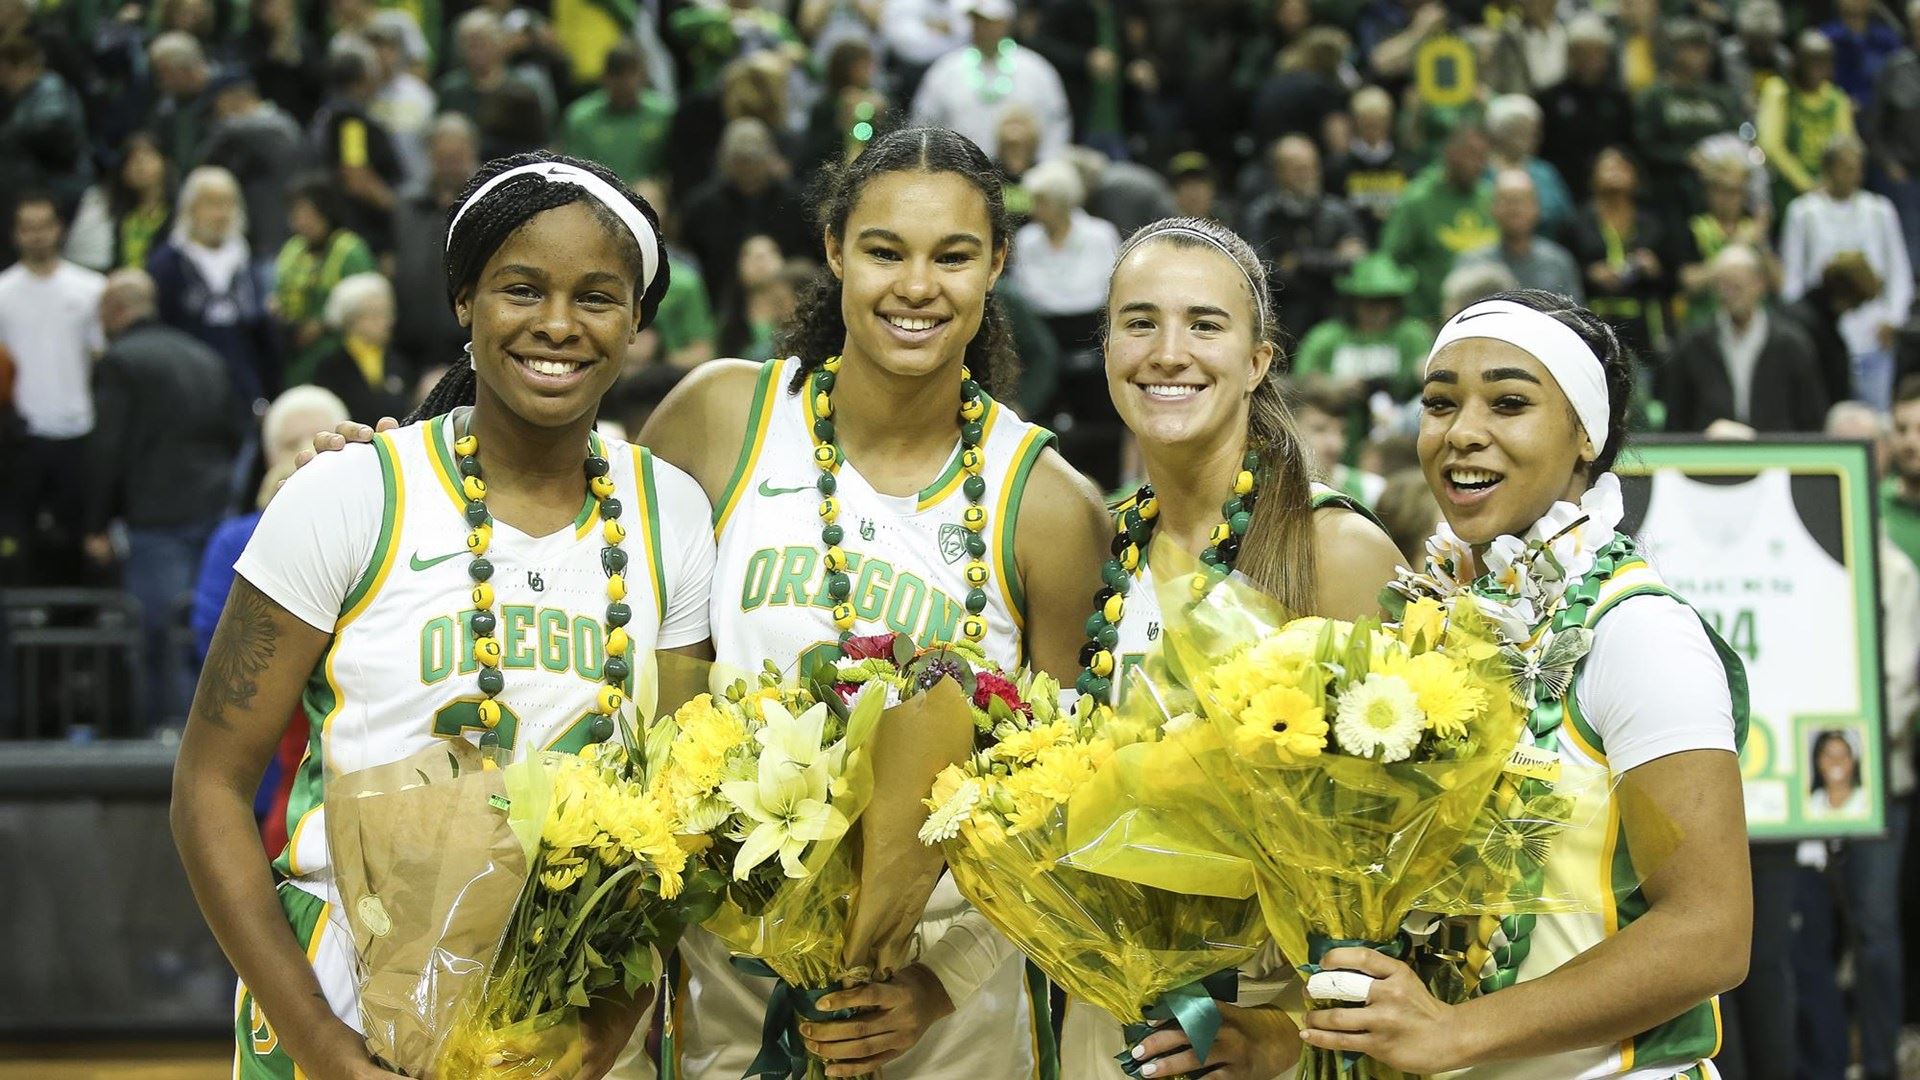 The four Oregon seniors with flowers